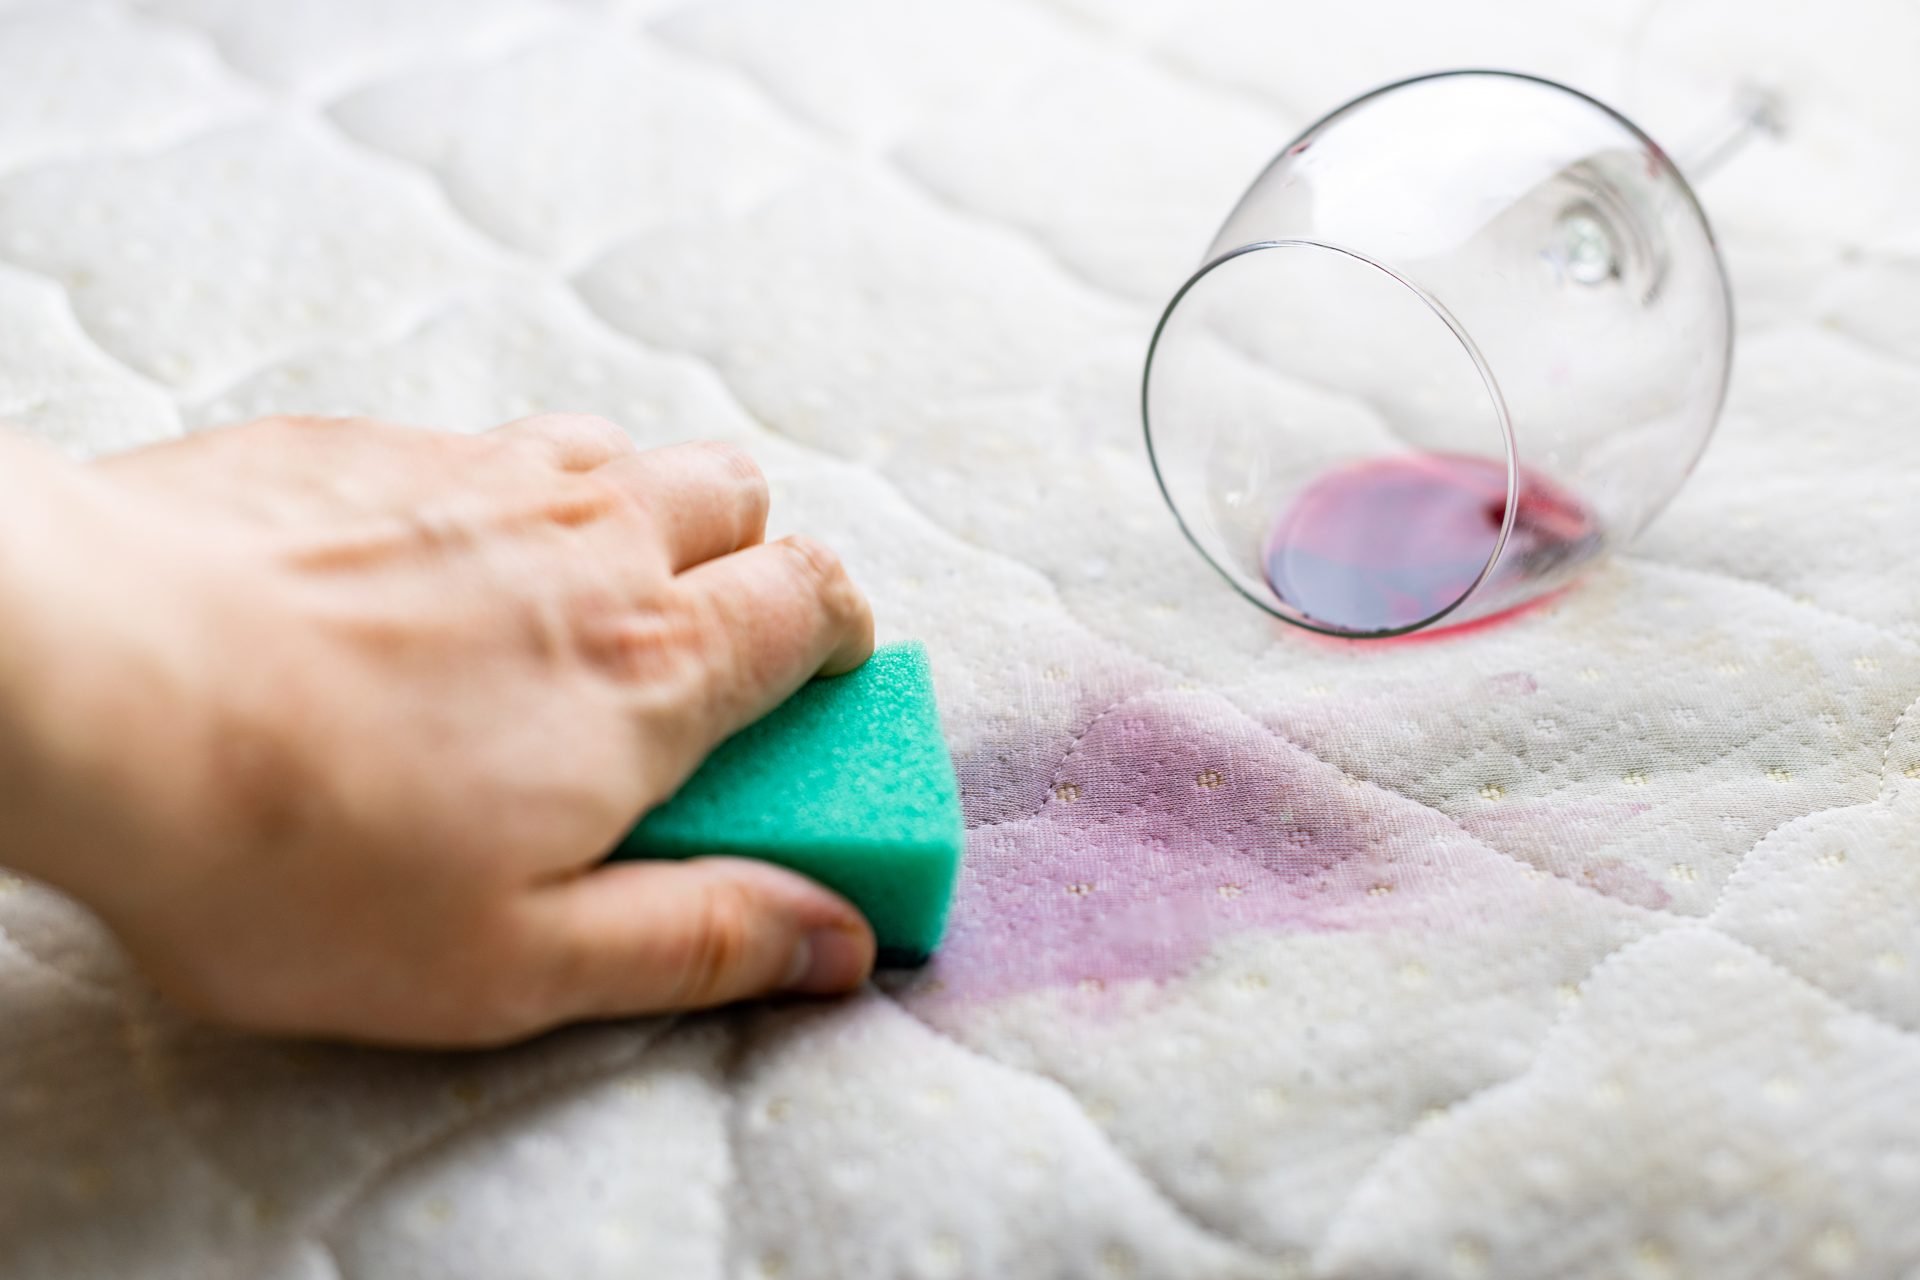 A mattress is one of the most substantial investments you'll ever make. Investing in mattress protectors is a good way to ensure it lasts a long time while remaining hygienic.